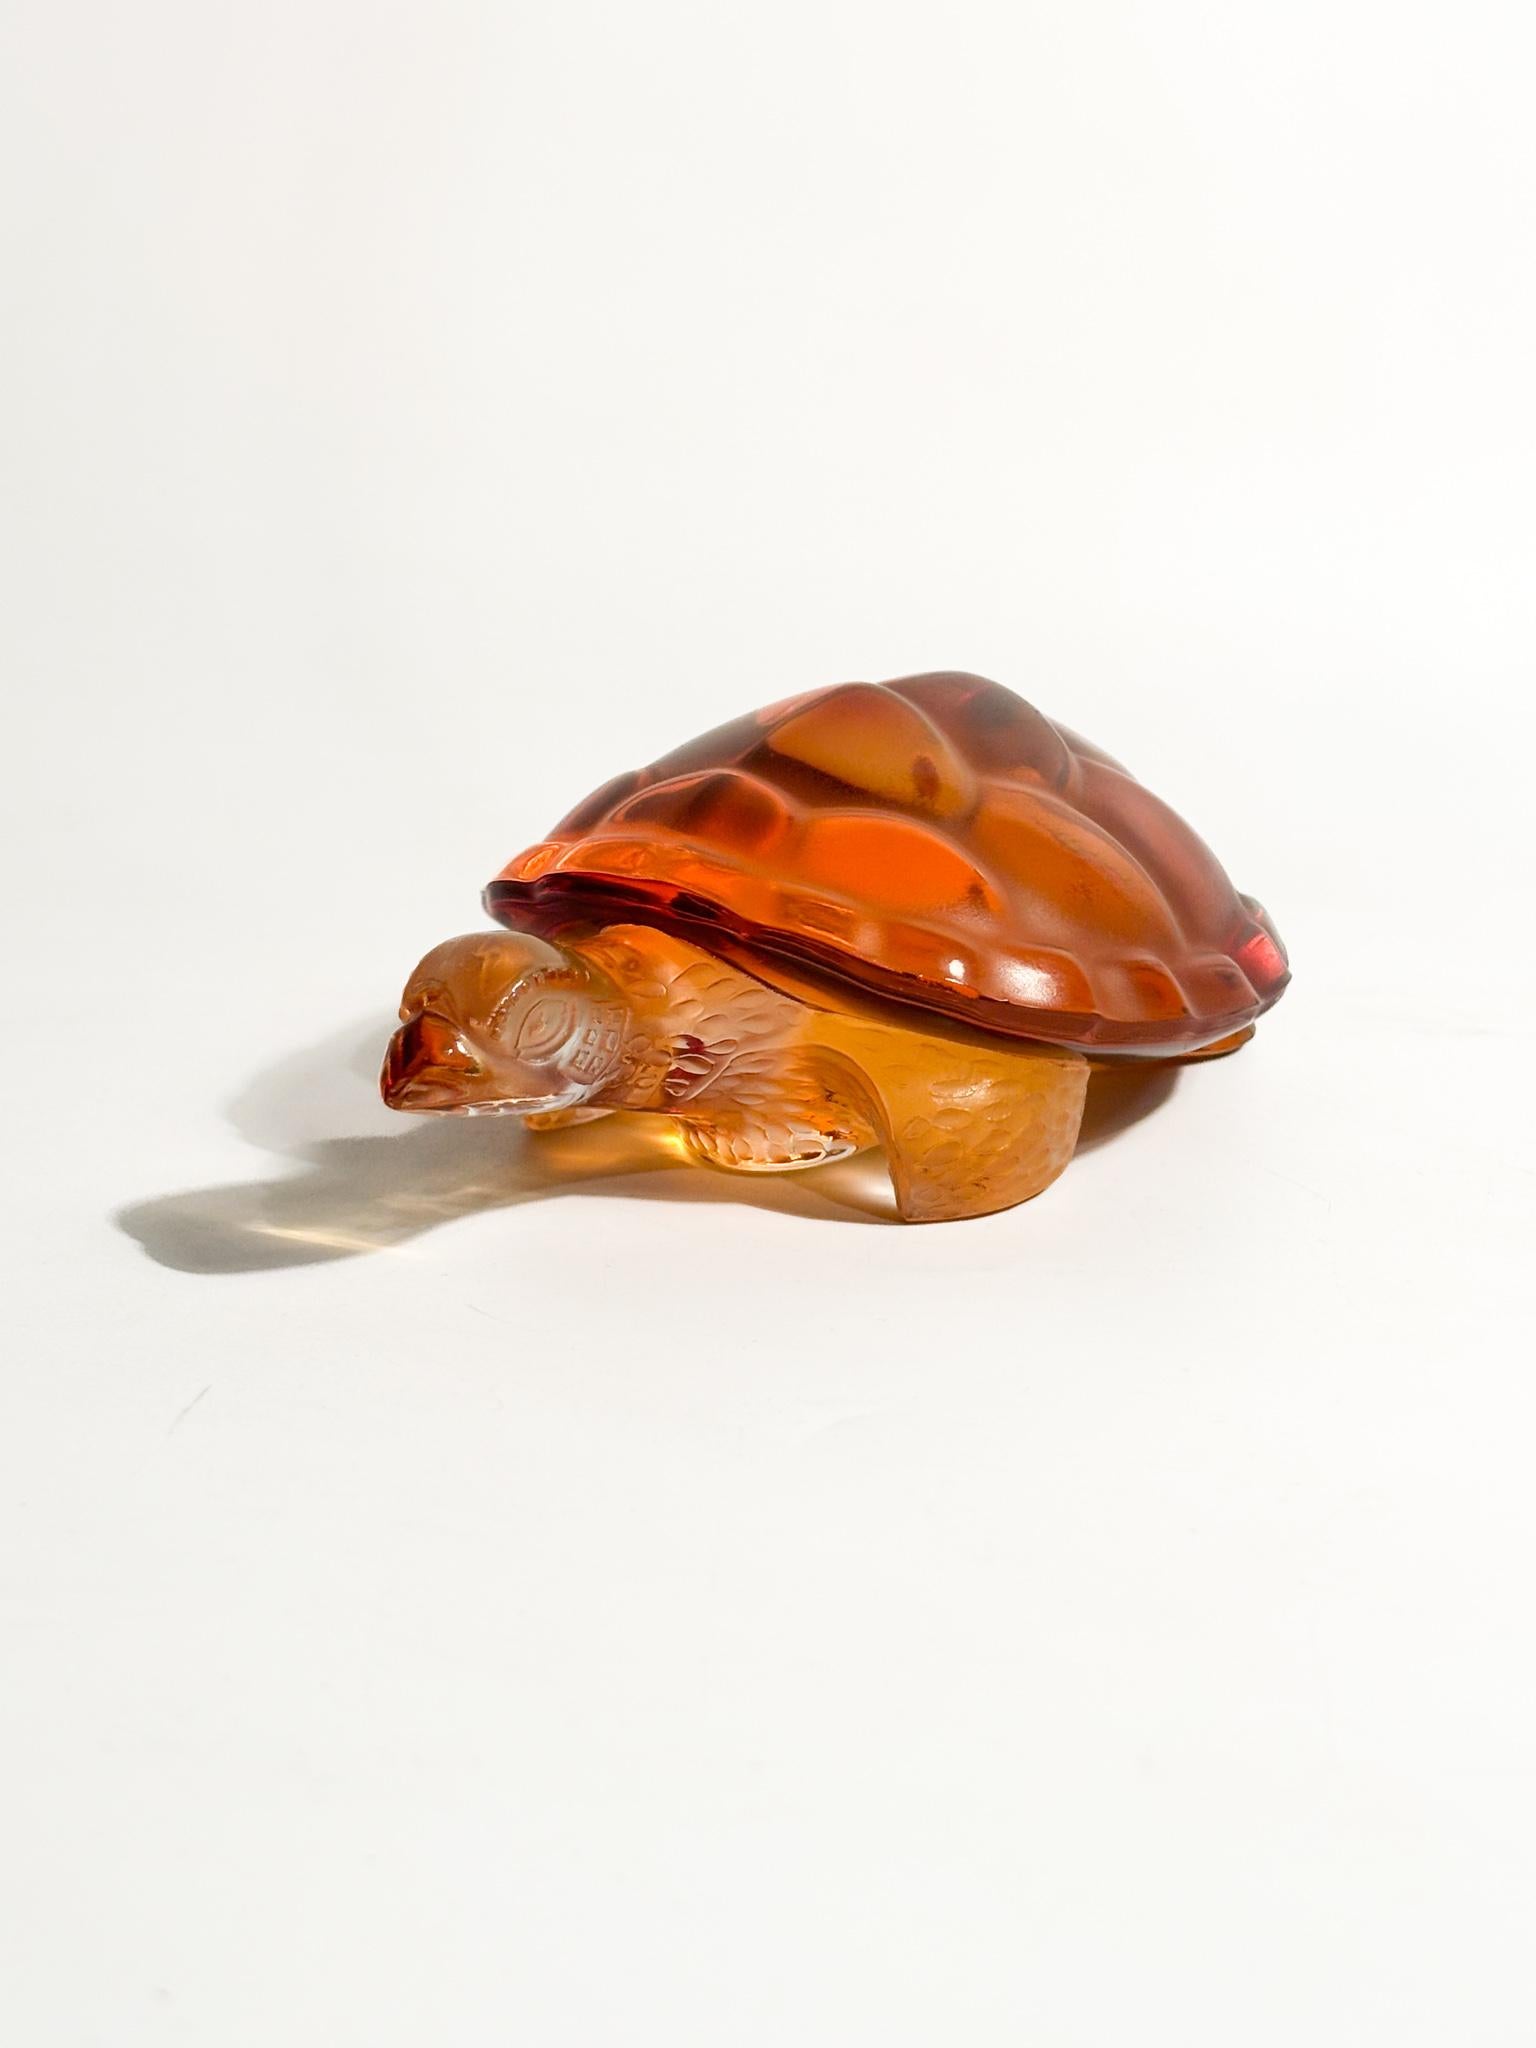 Turtle sculpture in orange Lalique crystal, made in the 1950s

Ø cm 10 Ø cm 14,5 h cm 5

Lalique crystal refers to glassware produced by the French luxury brand Lalique. Lalique is famous for its exquisite crystal sculptures, vases, bowls, jewelry